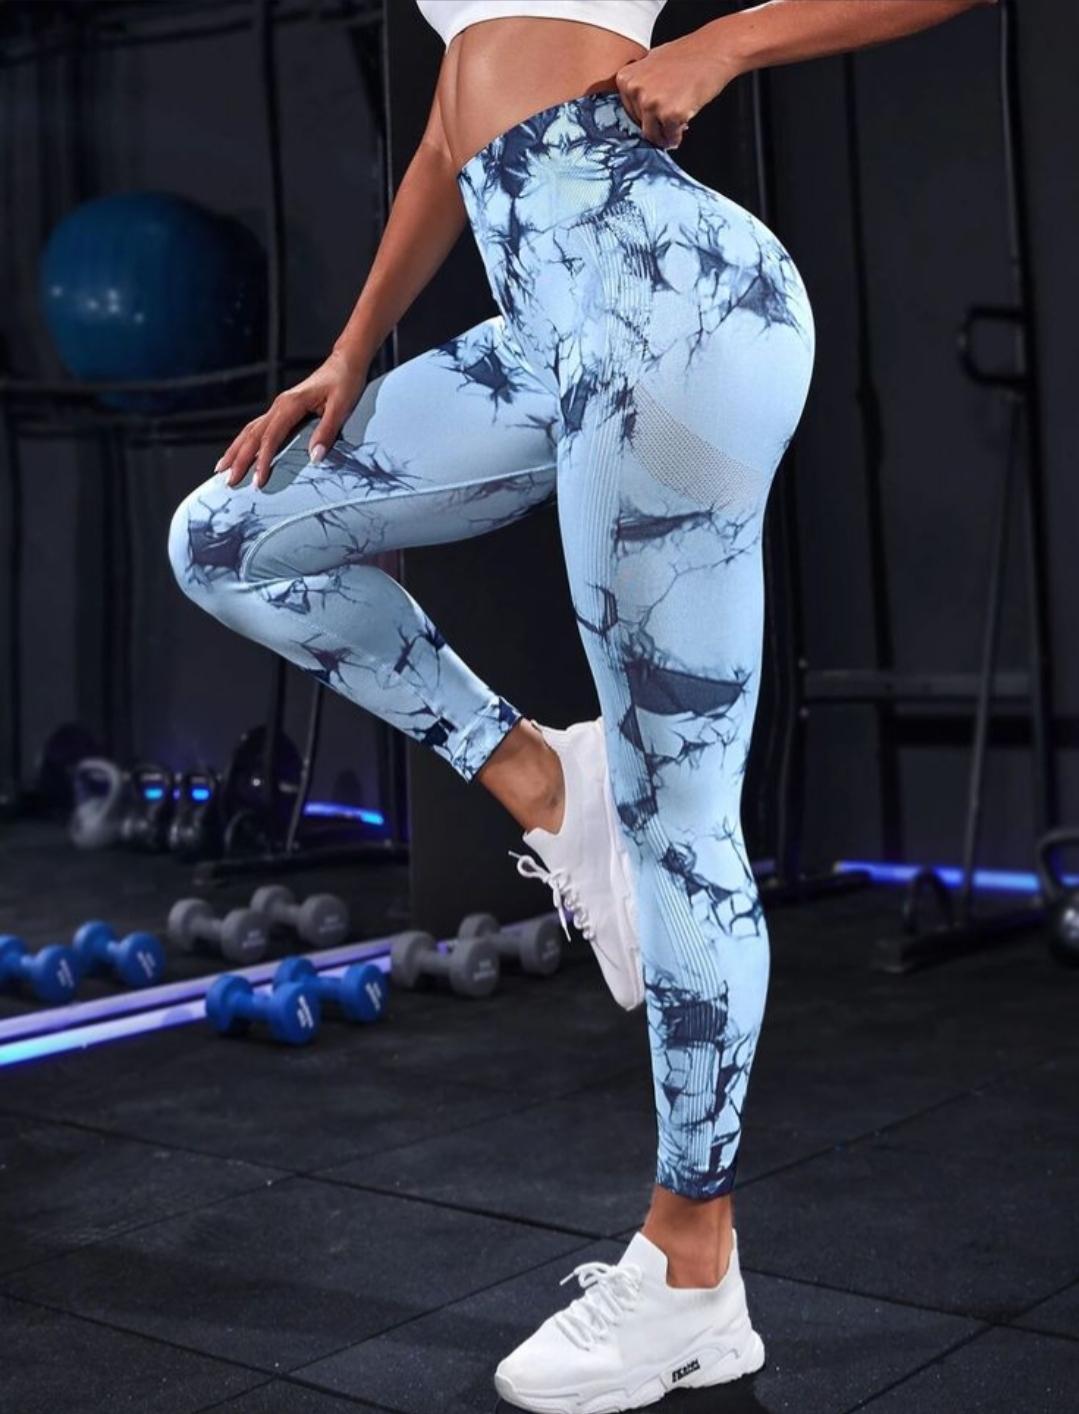 MARBLE TIE DYE BLUE  Yoga Tights and Pants –